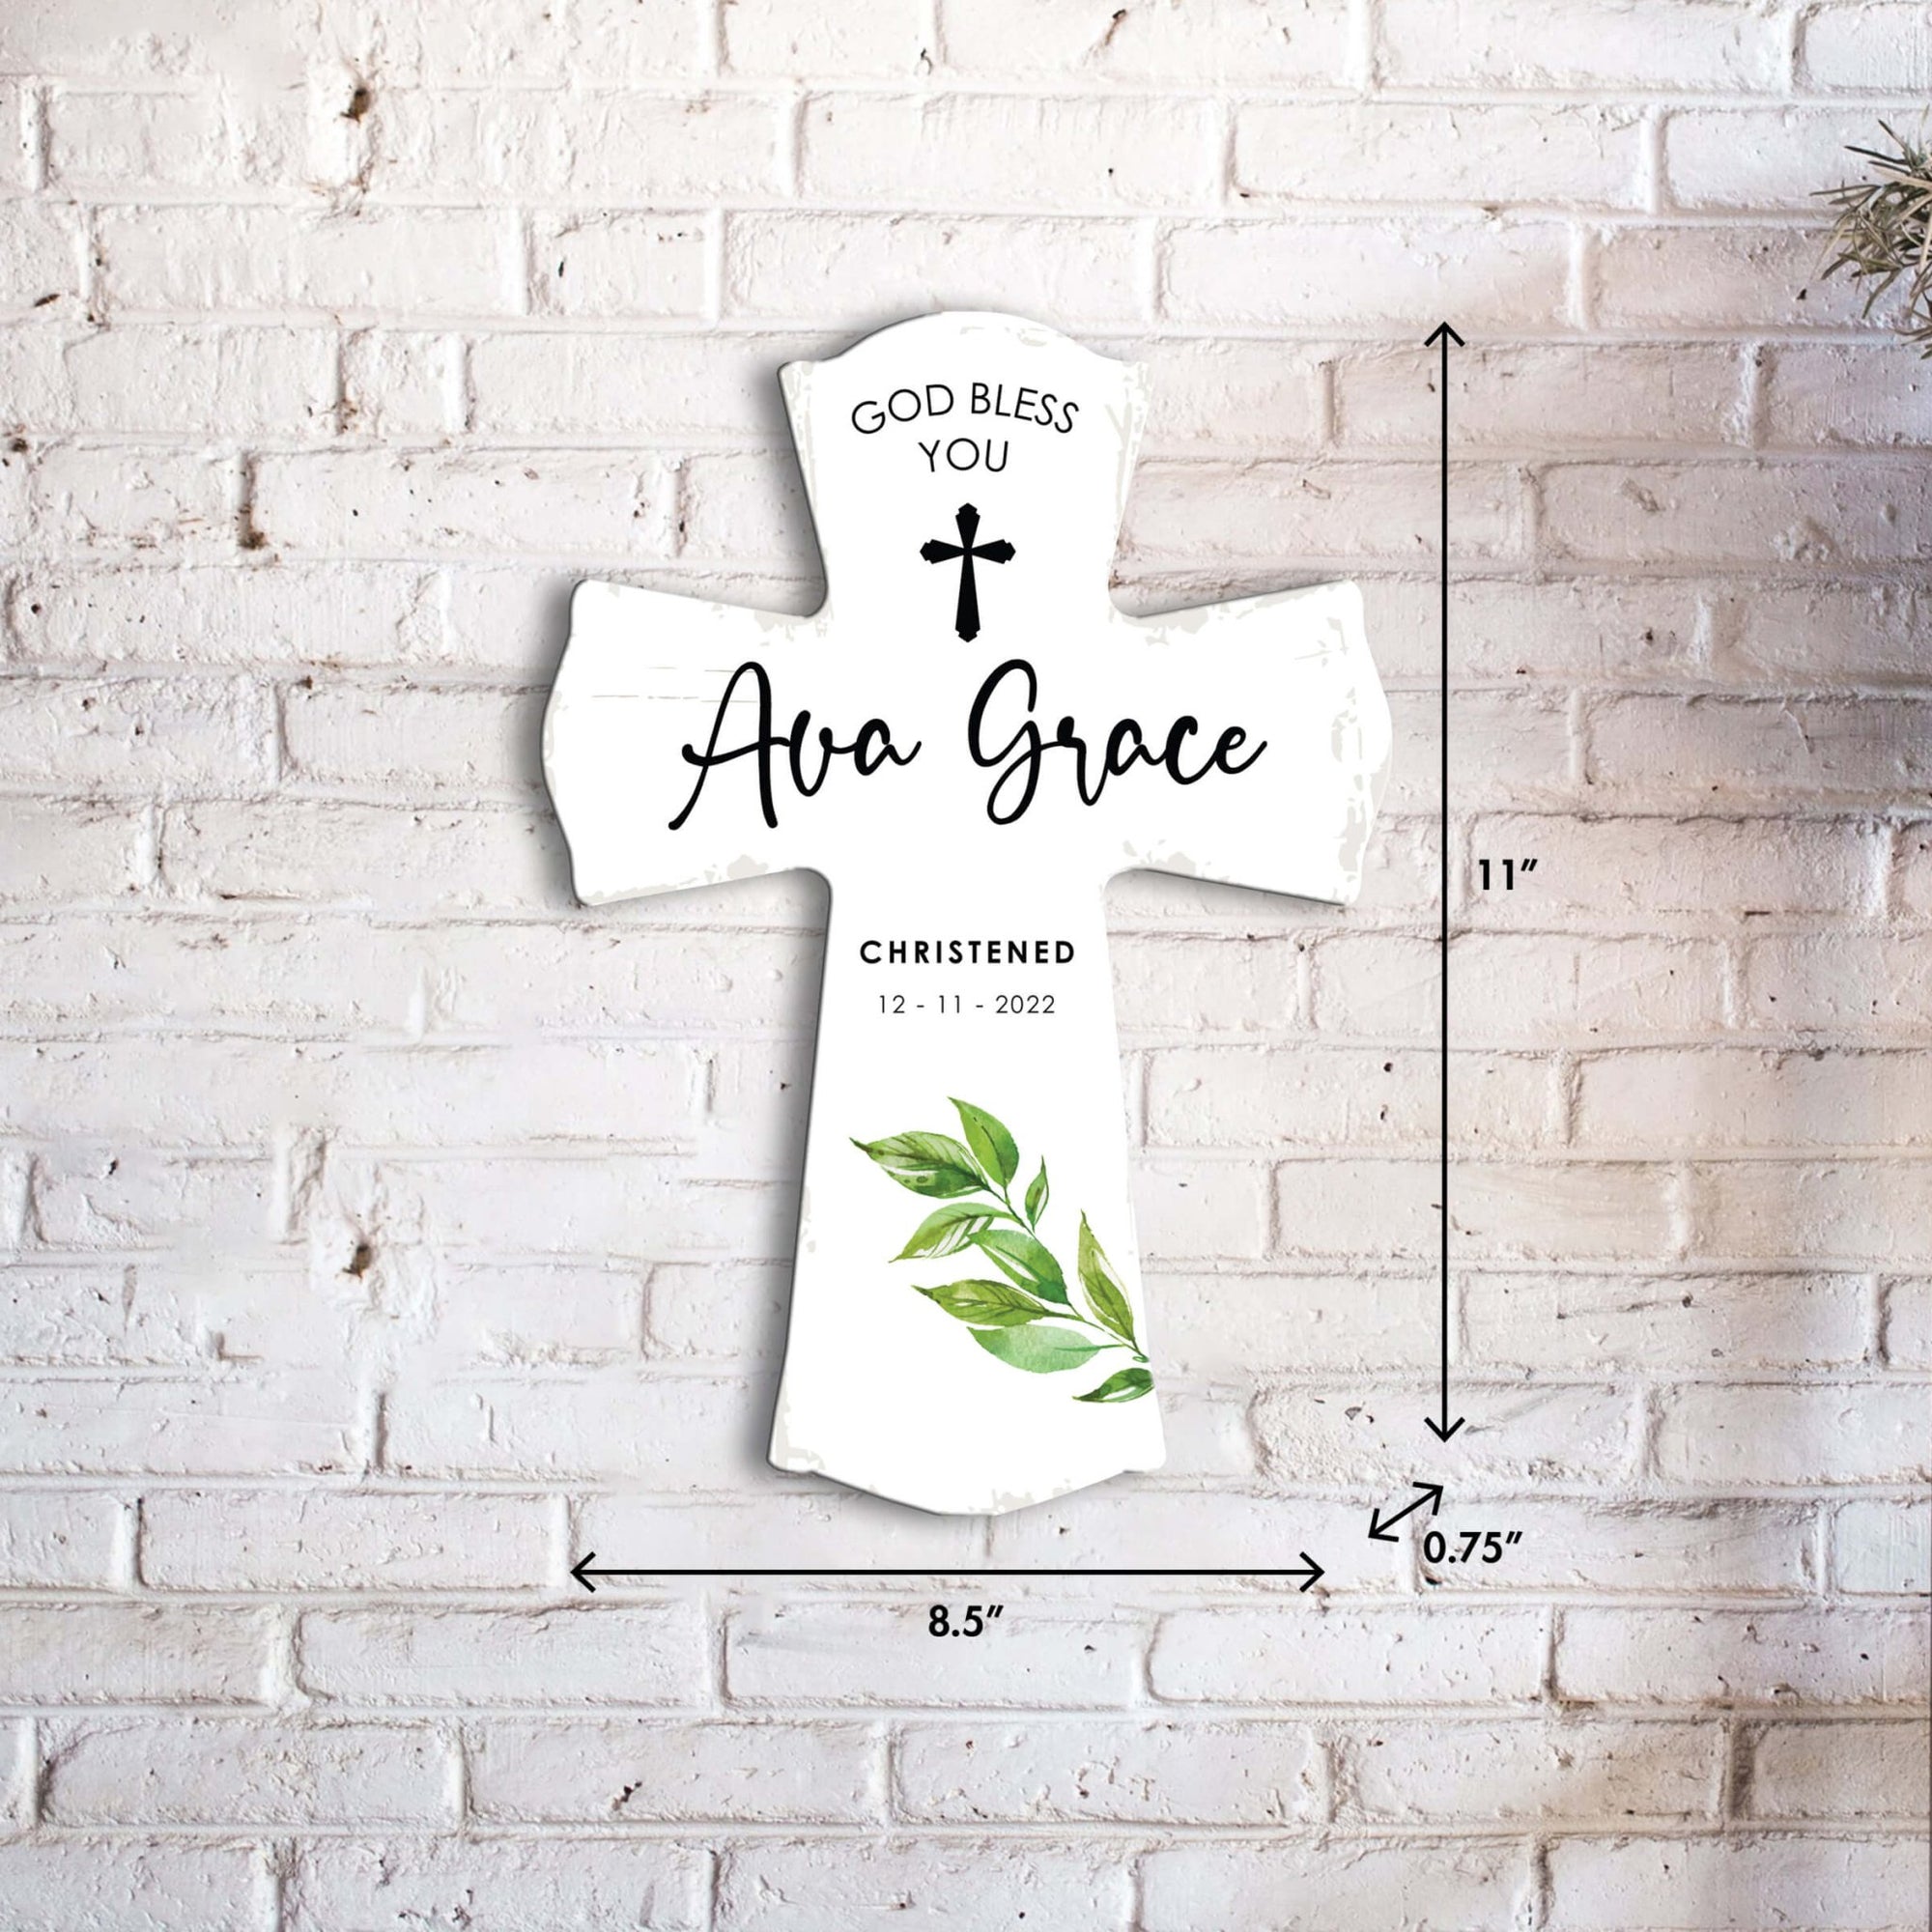 Personalized Wooden Cross for Christening Gifts - God Bless You - LifeSong Milestones